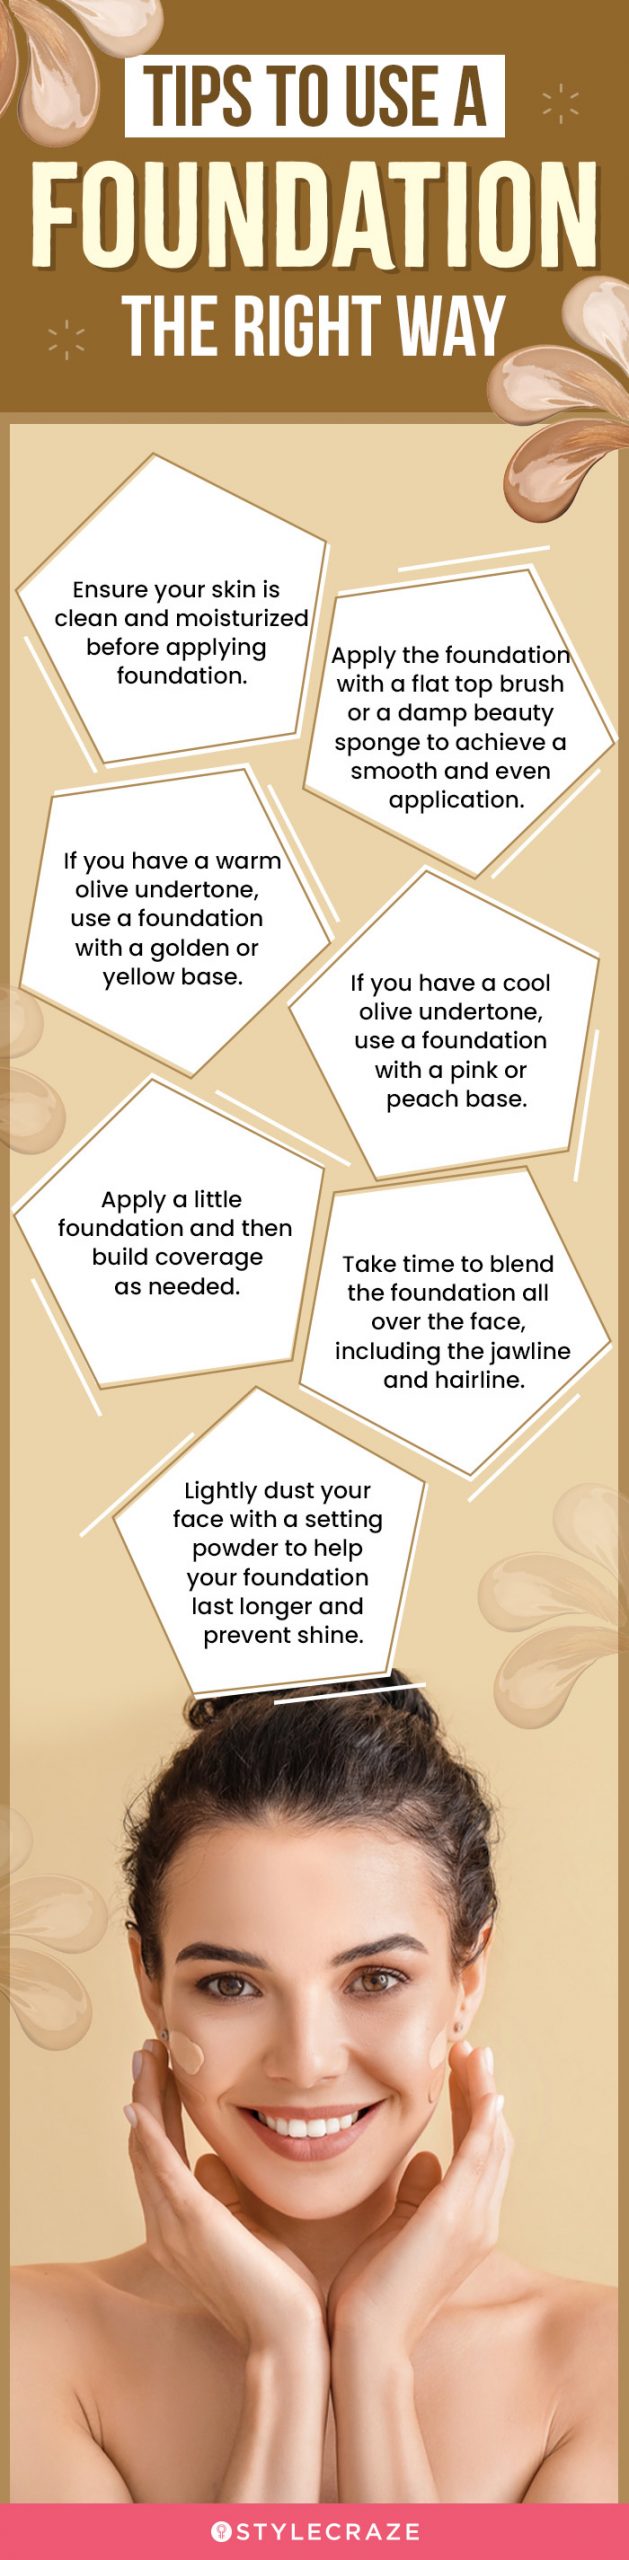 Tips To Use A Foundation The Right Way (infographic)